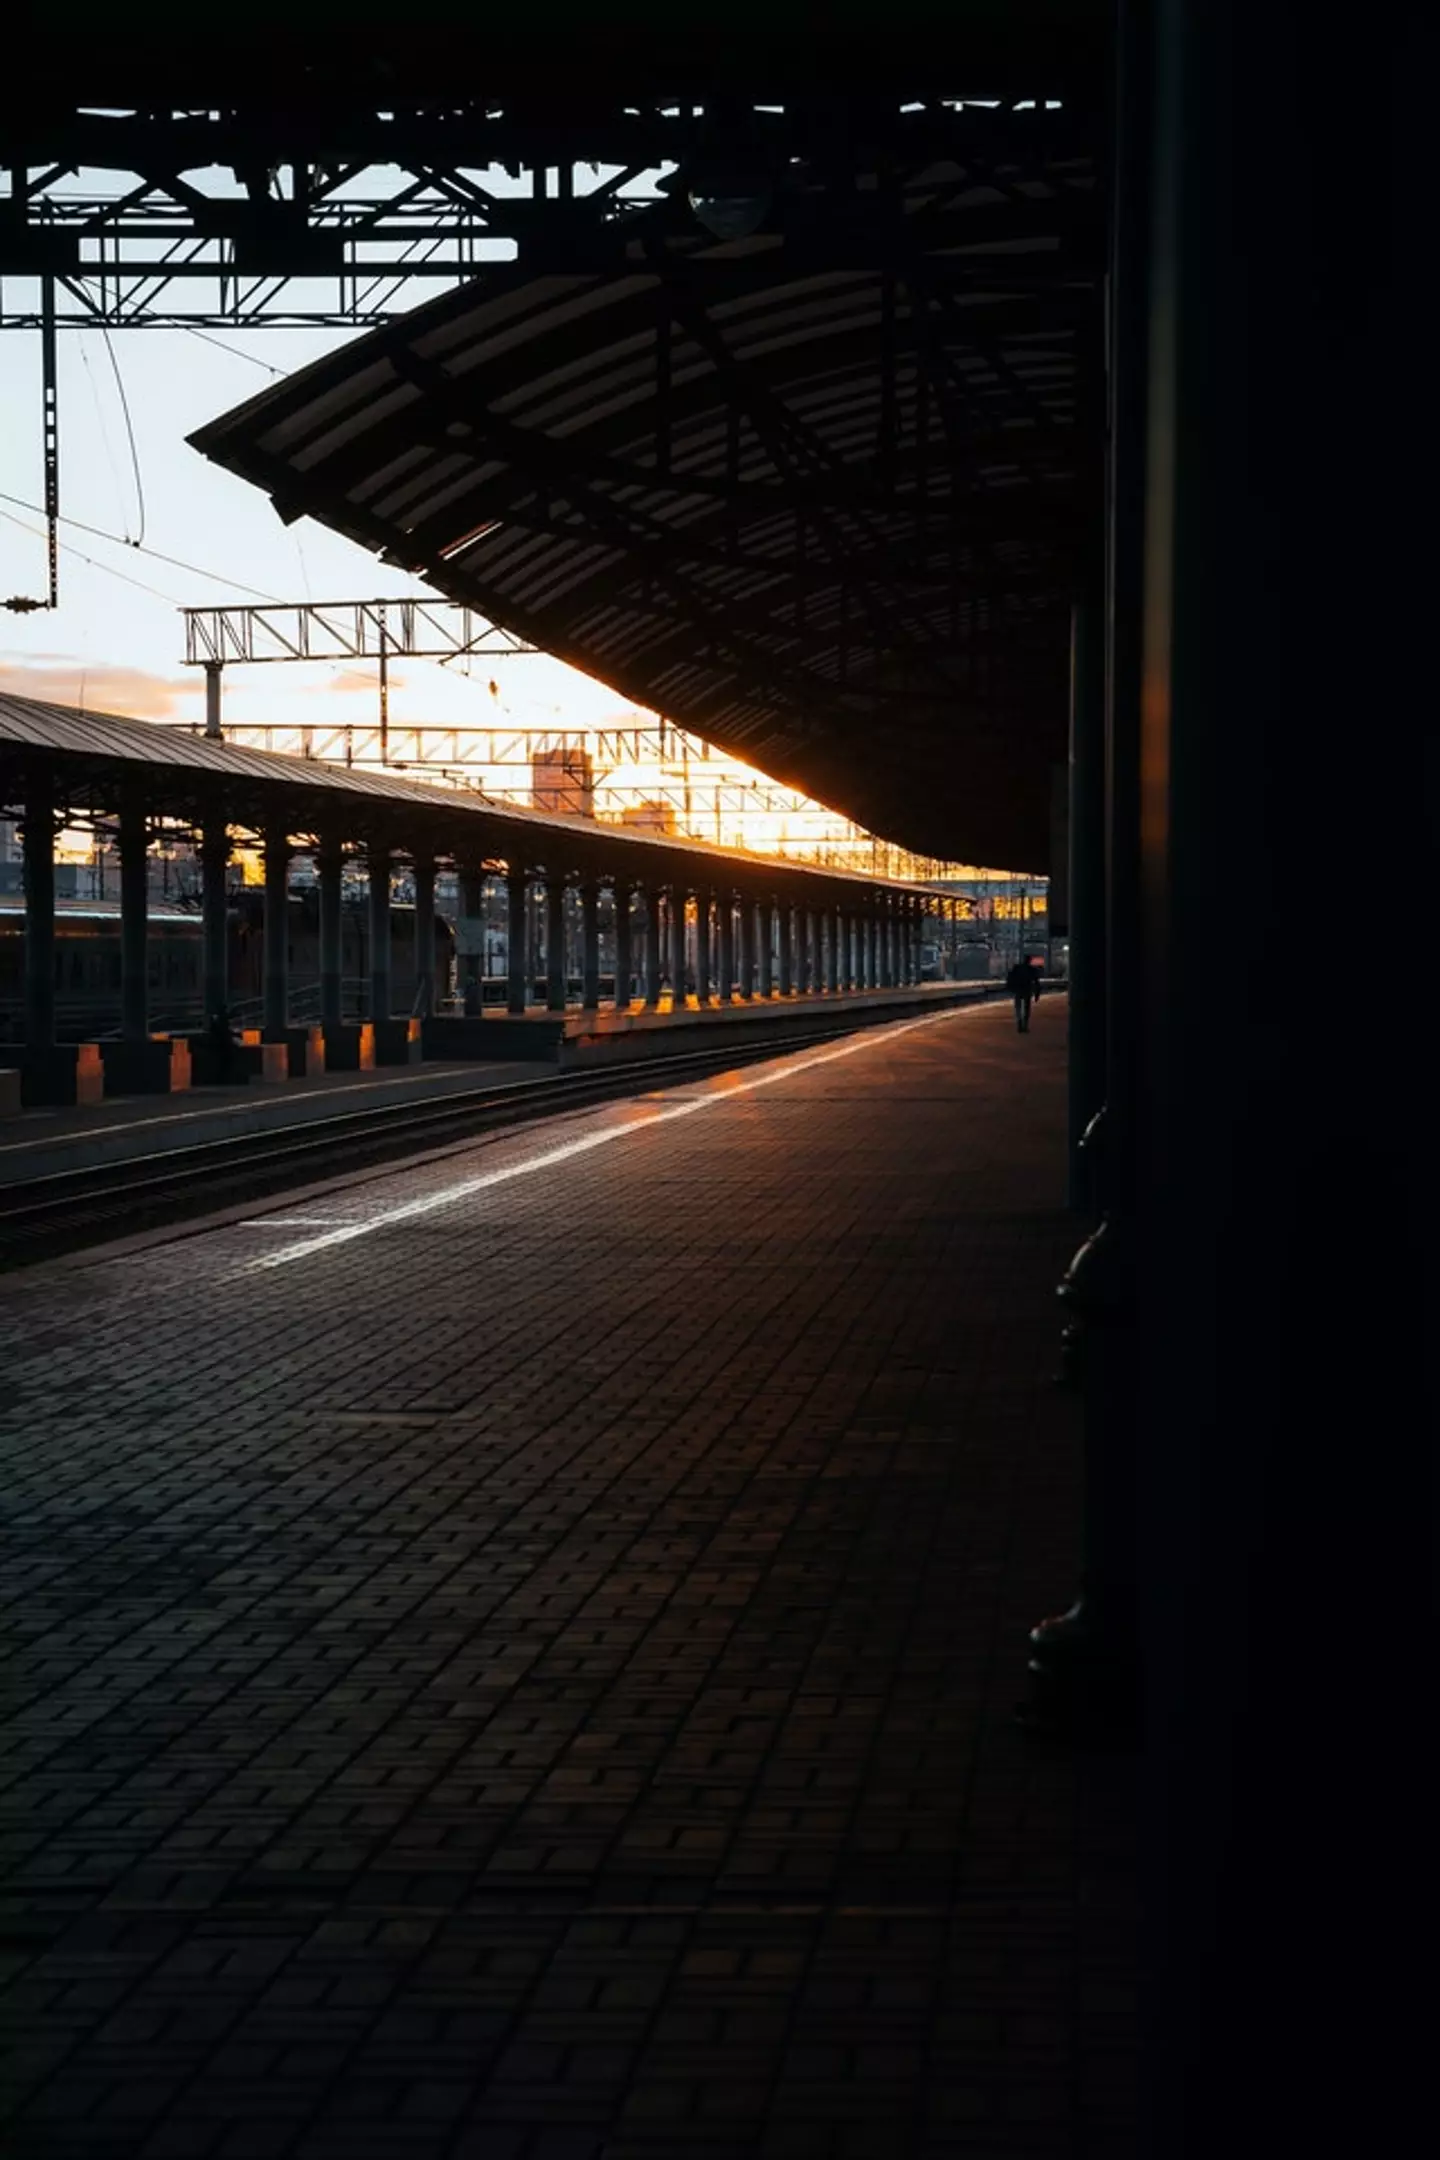 A man on a sleeper train woke up to discover it had never even left the station.